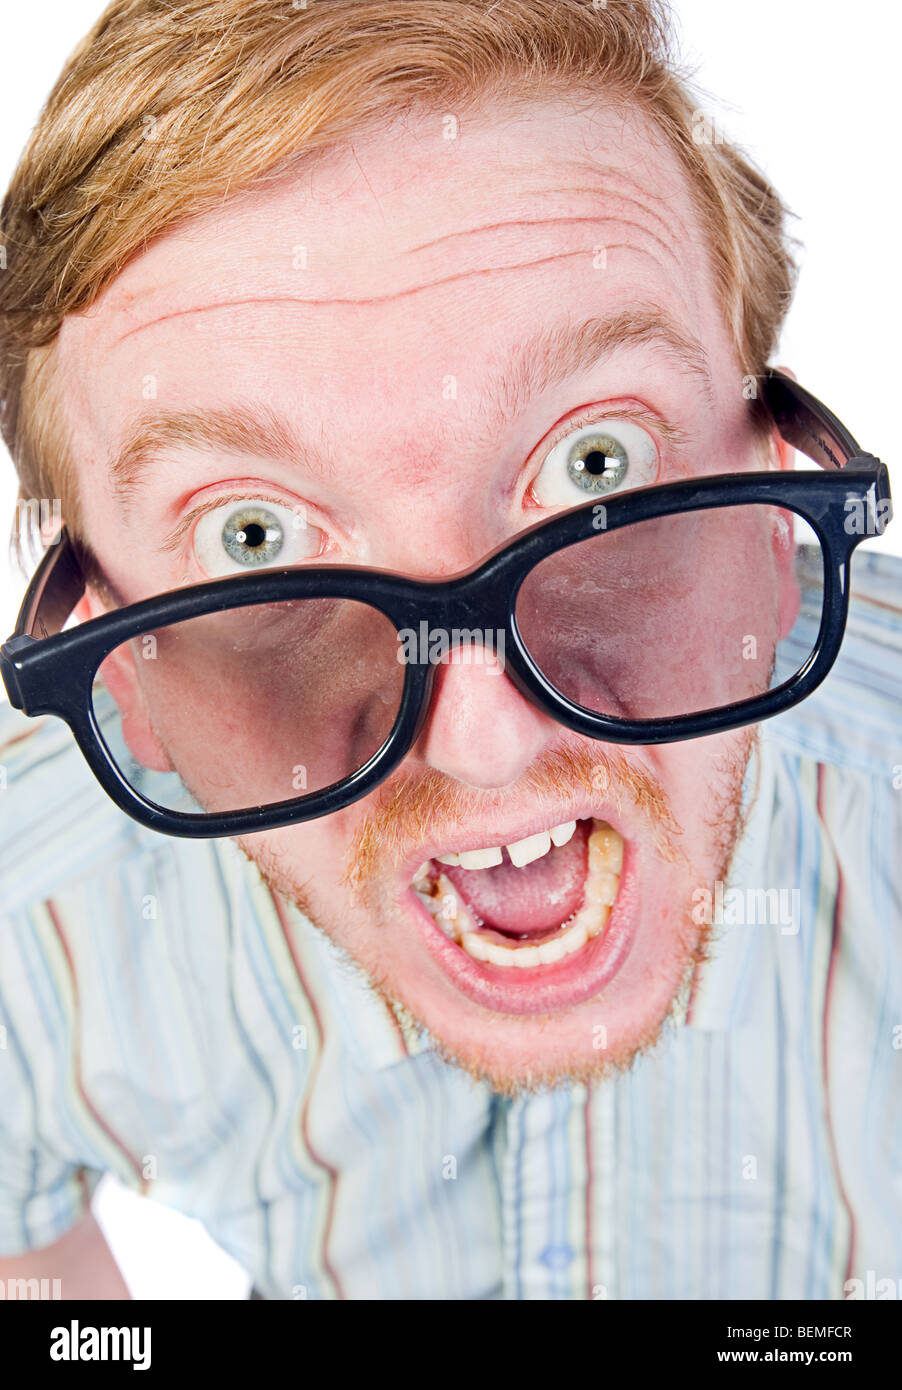 Shot of an Angry Red Headed Geek with Thick Rimmed Glasses Stock Photo